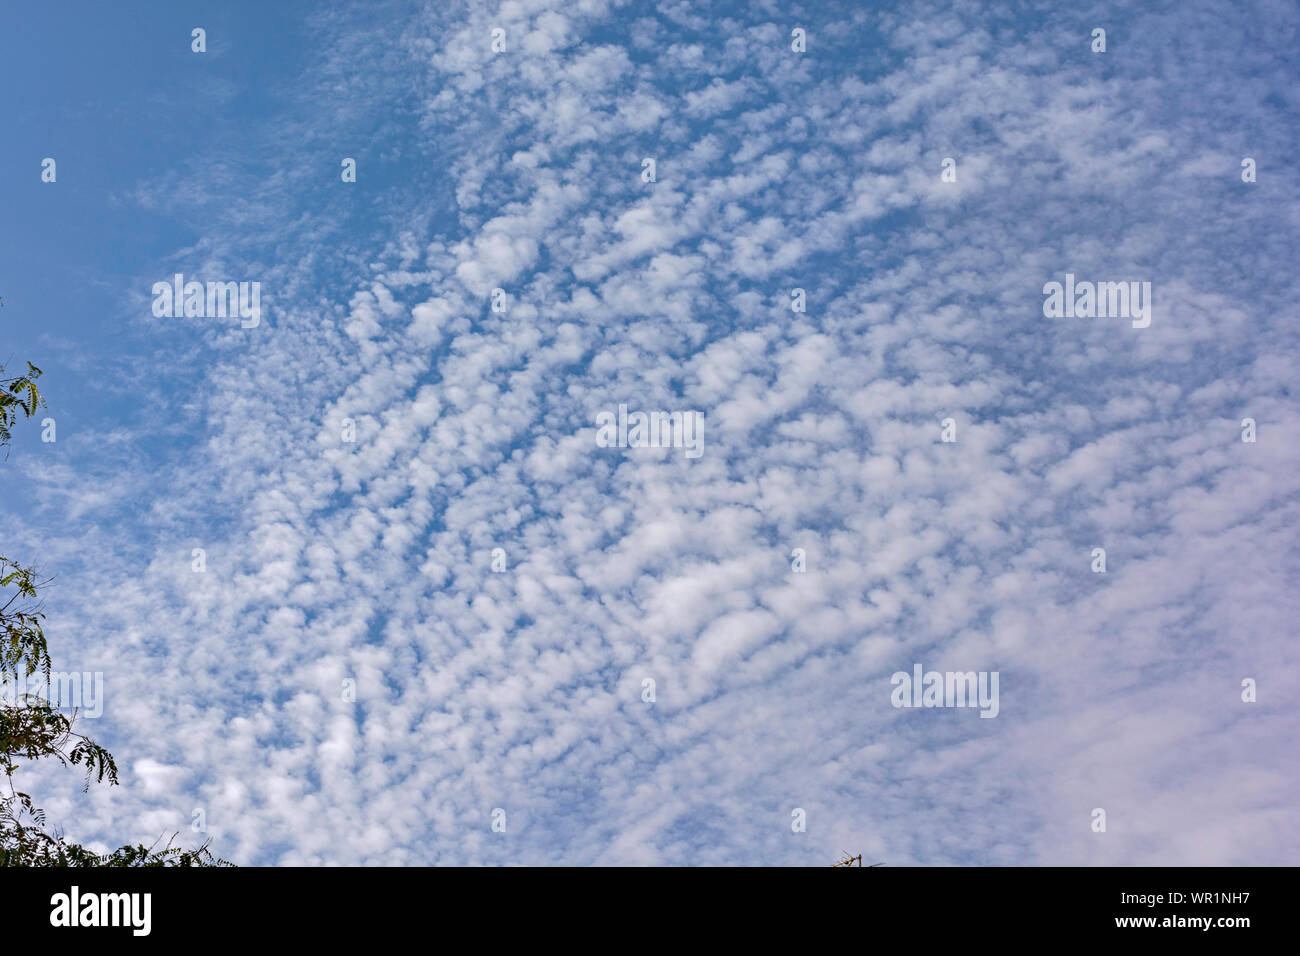 Cirrocumulus Stratiformis and altocumulus Clouds in a Bright Blue Sky with a bit of haze in the foreground Stock Photo